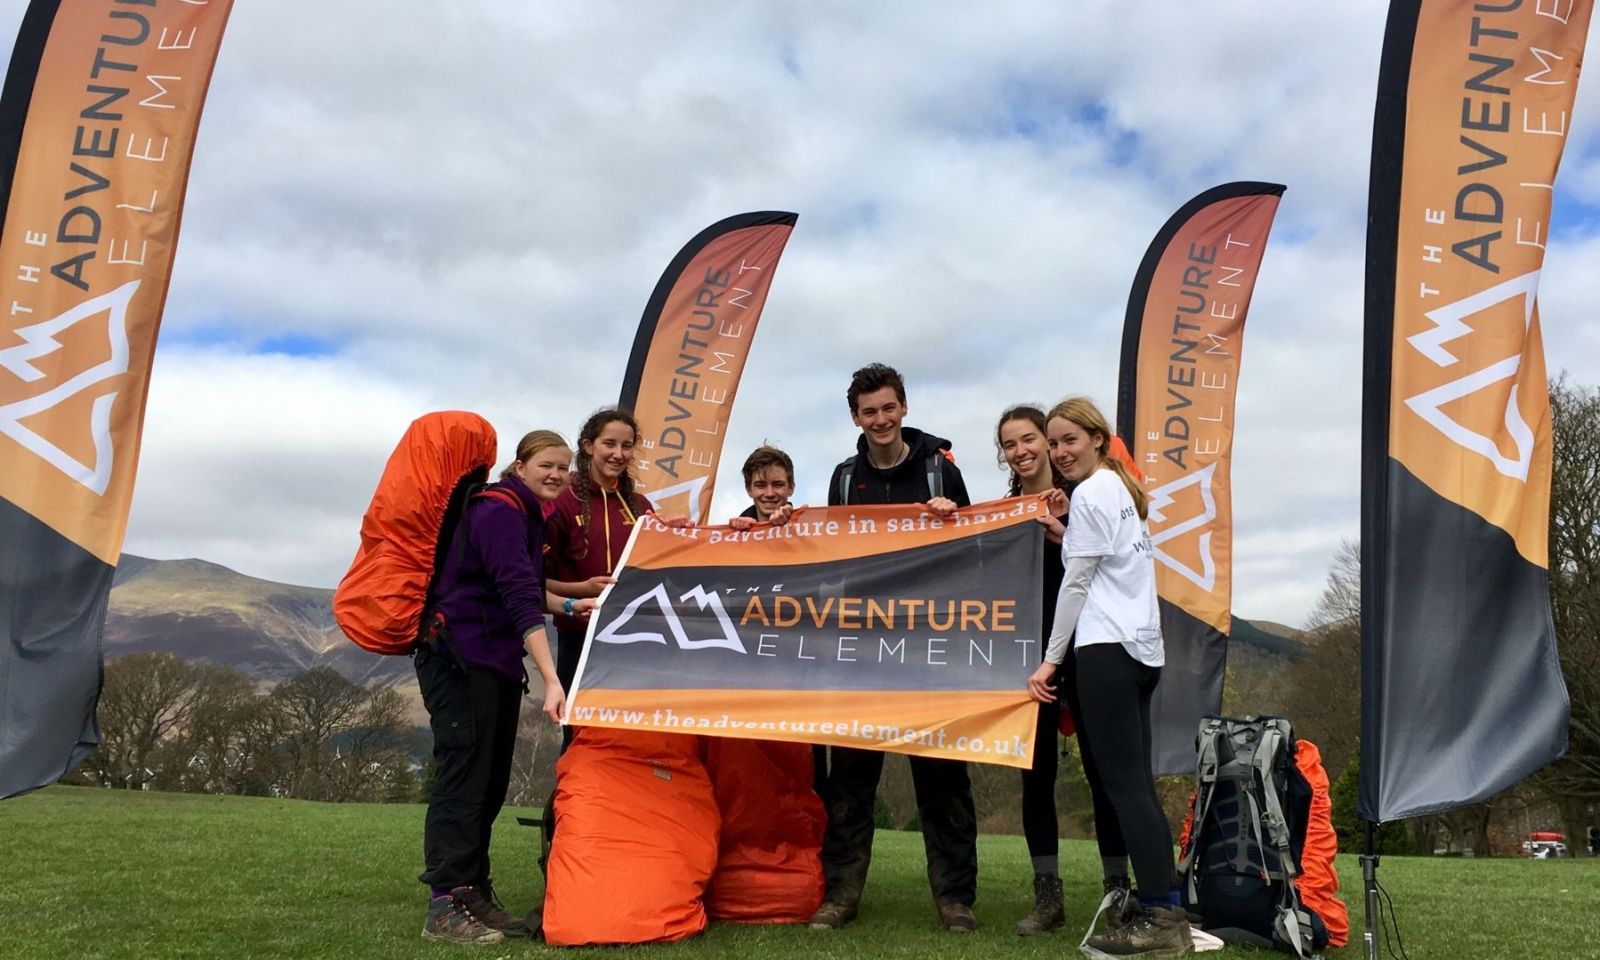 Team smiling and looking happy holding company flag after completing their DofE expedition.